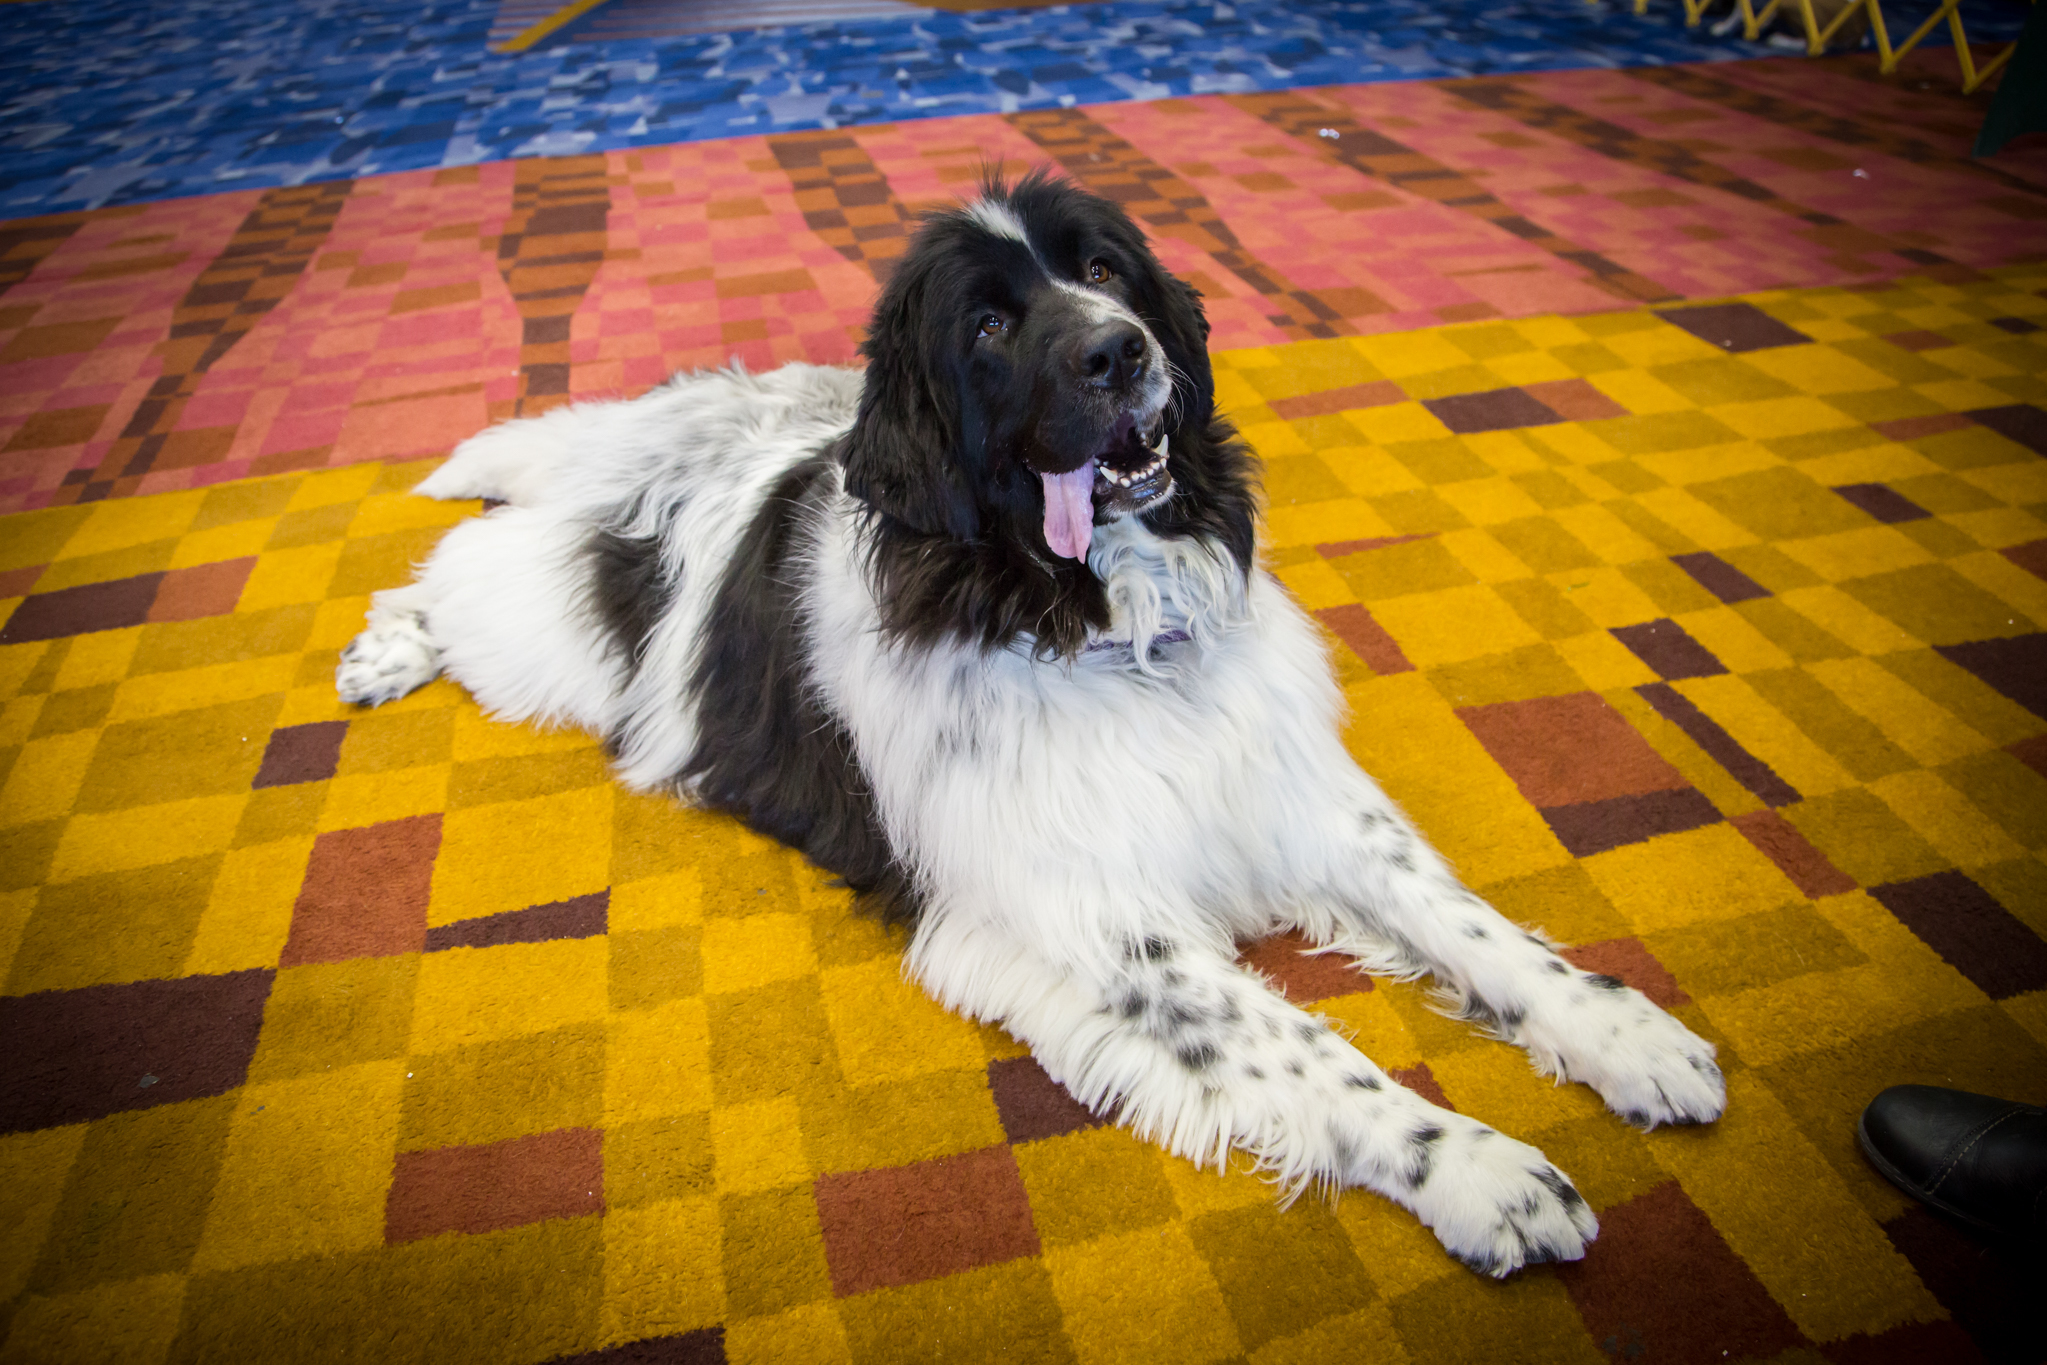 Photos from the International Kennel Club Dog Show at McCormick Place